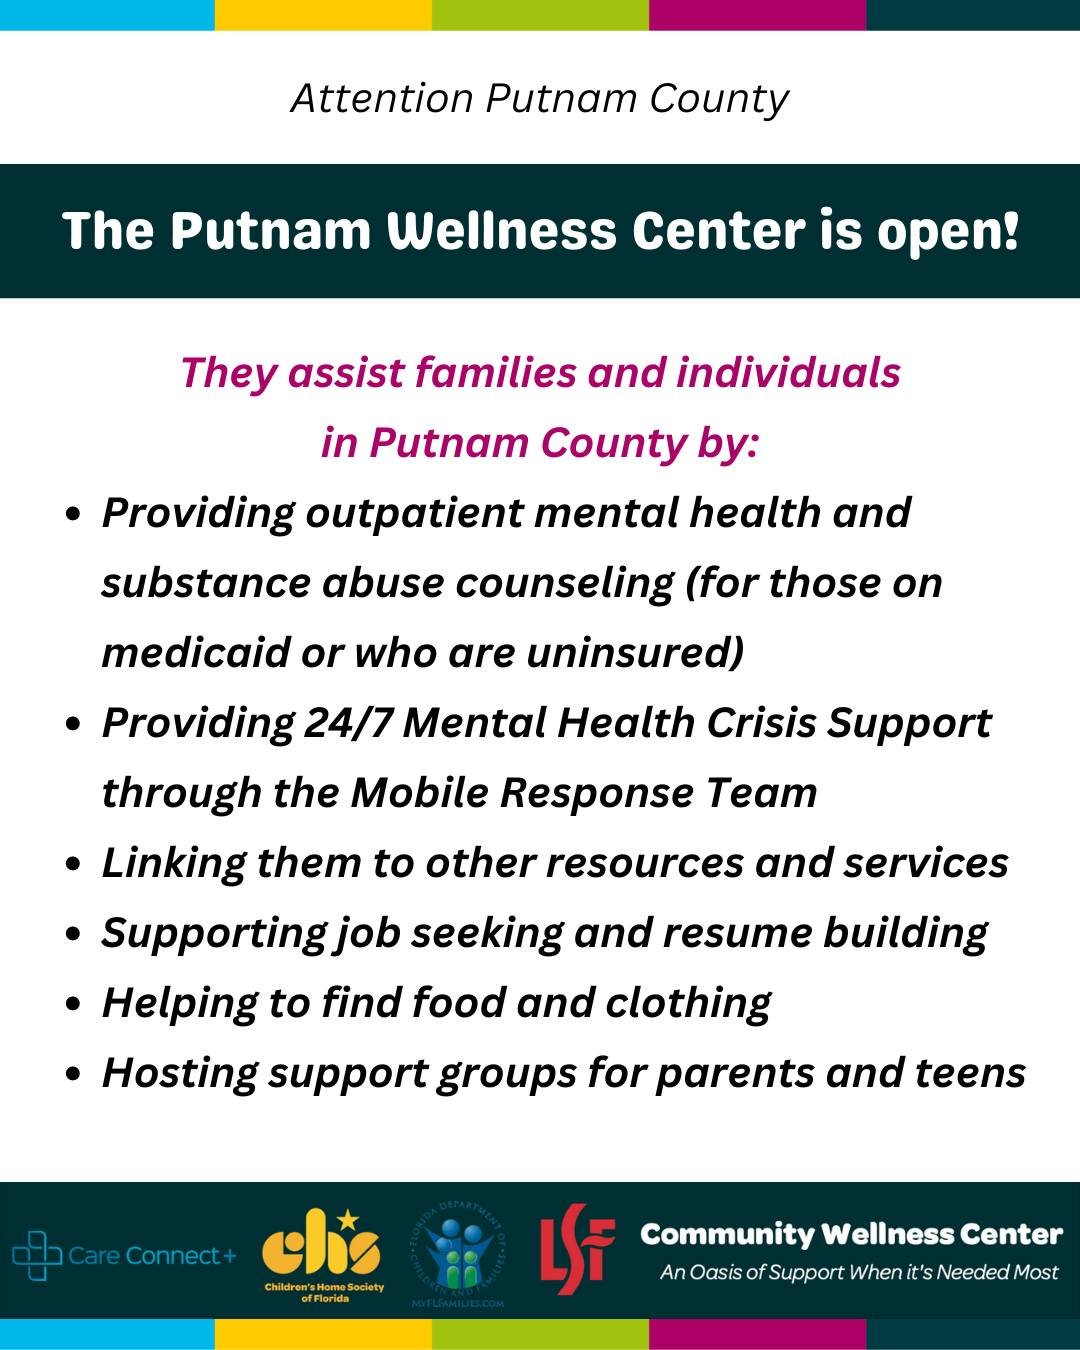 It's officially Mental Health Awareness Month, and we wanted to share this information from our friends at The Putnam Wellness Center in Palatka. 

They provide mental health resources and other services and support for Putnam County residents. 

If 